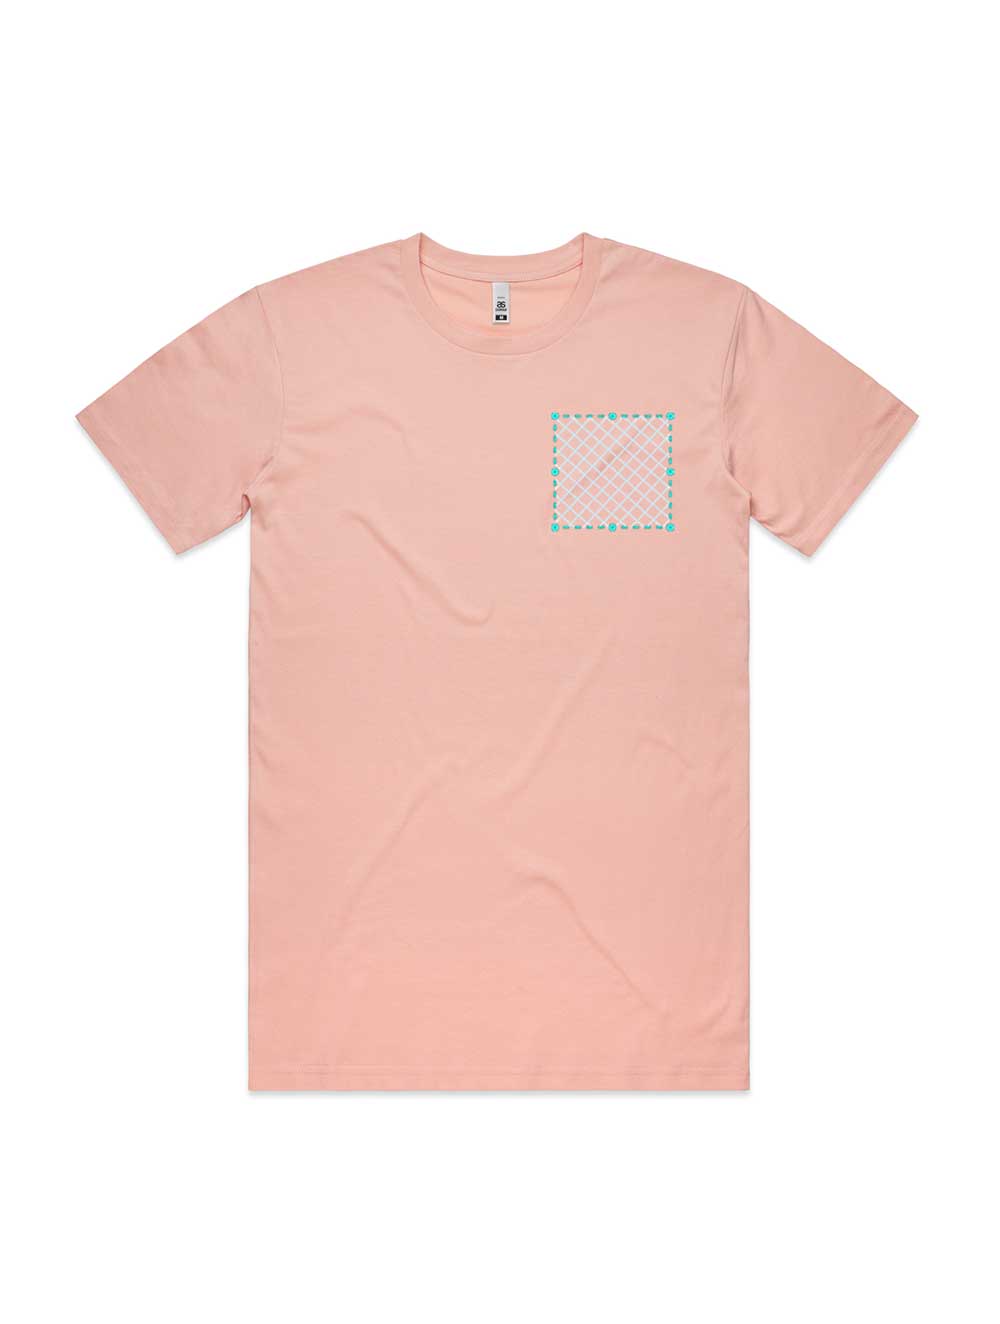 Embroidered AS Colour Basic Tee